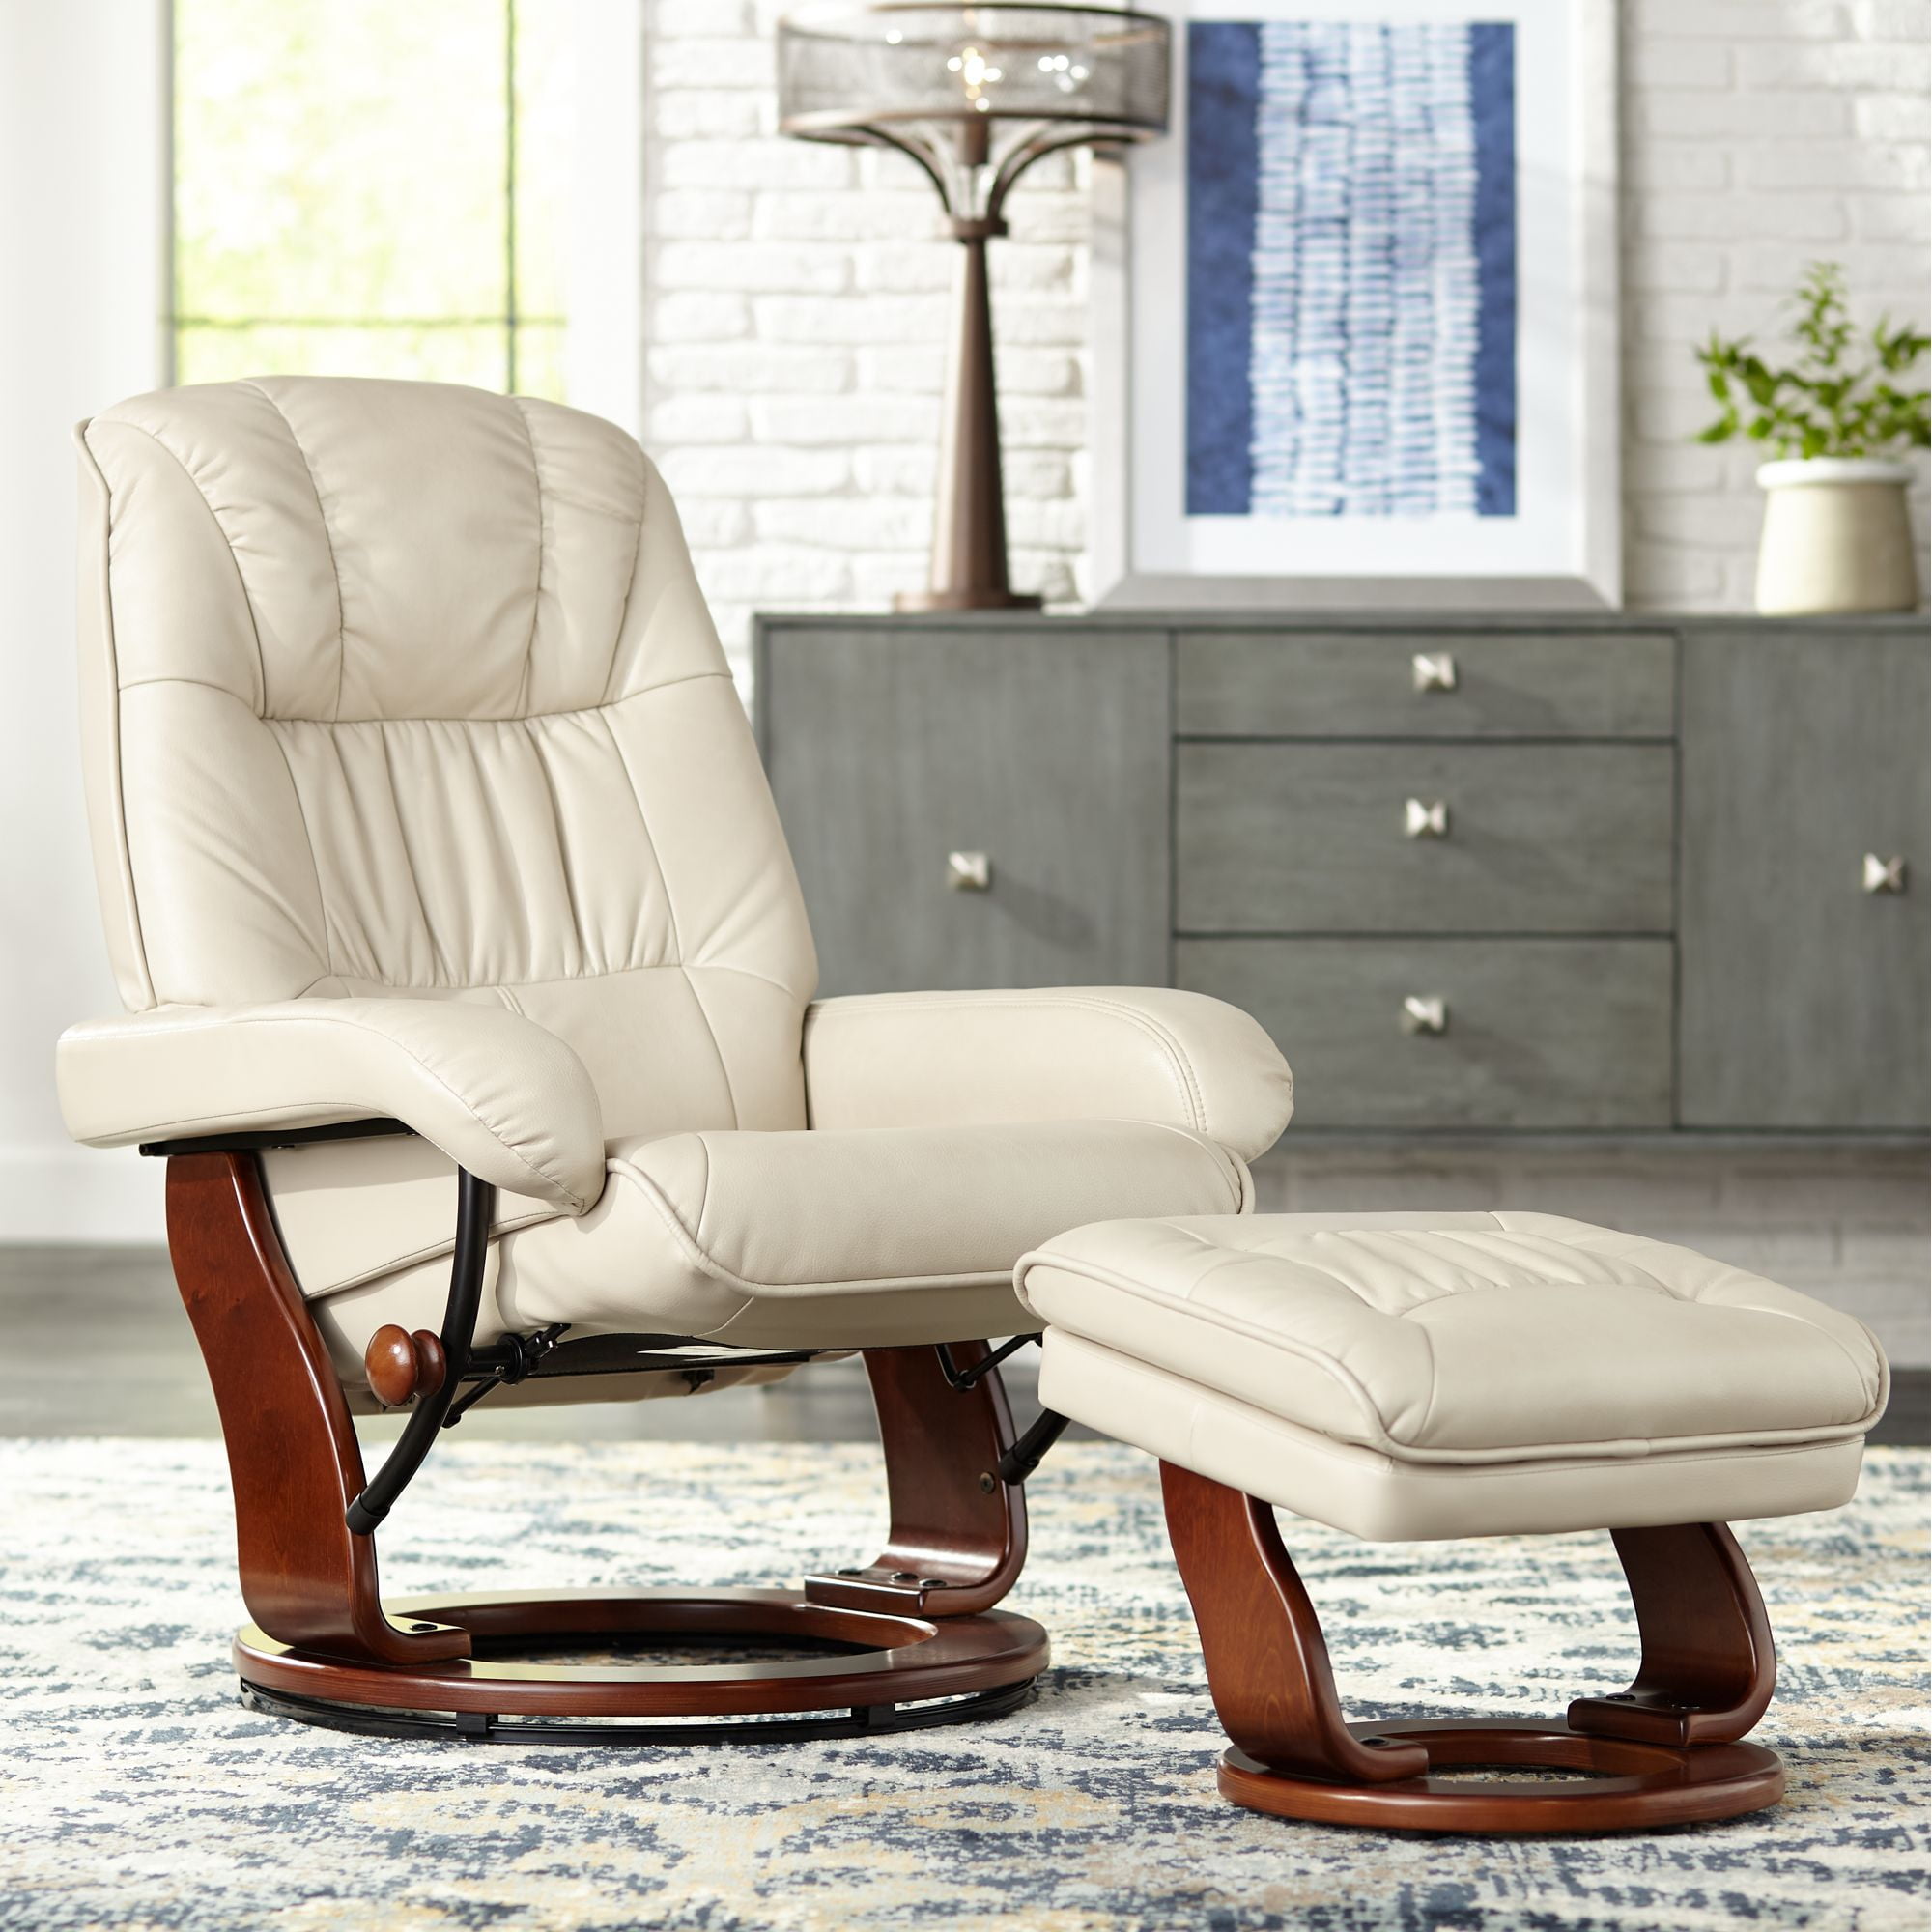 Faux Leather Recliner Chair, White Leather Reclining Chair With Ottoman